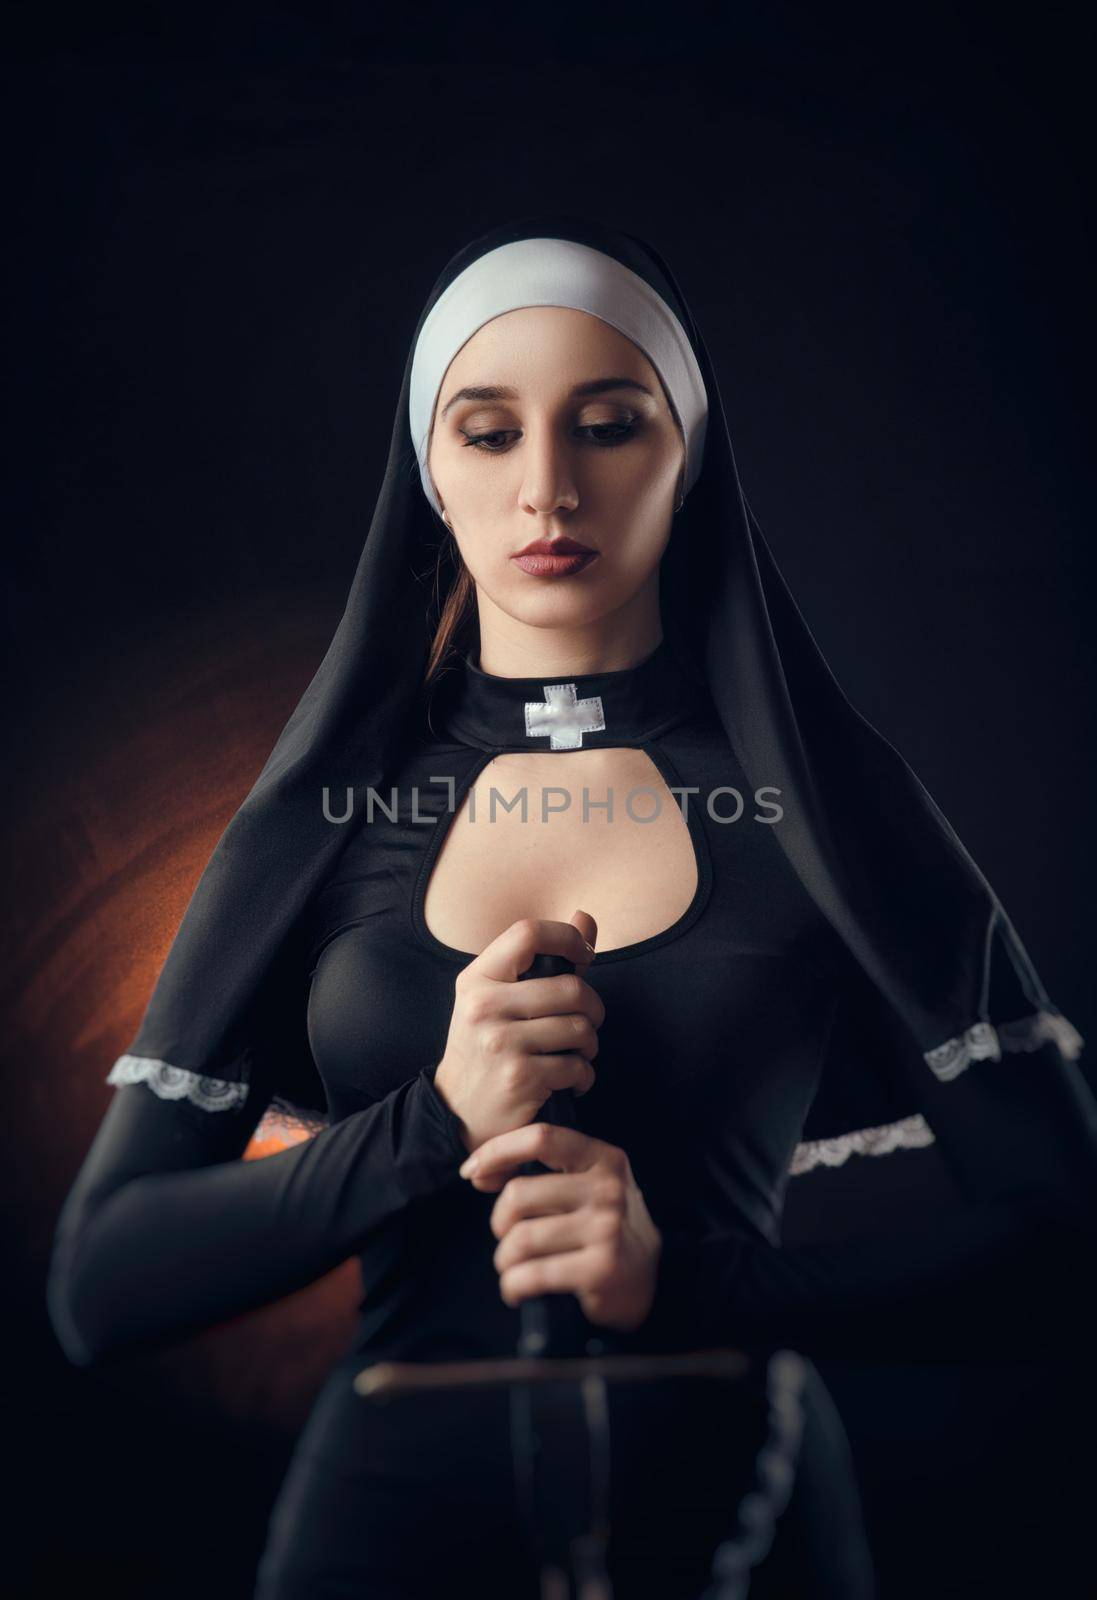 a nun with a weapon in the name of faith by Rotozey